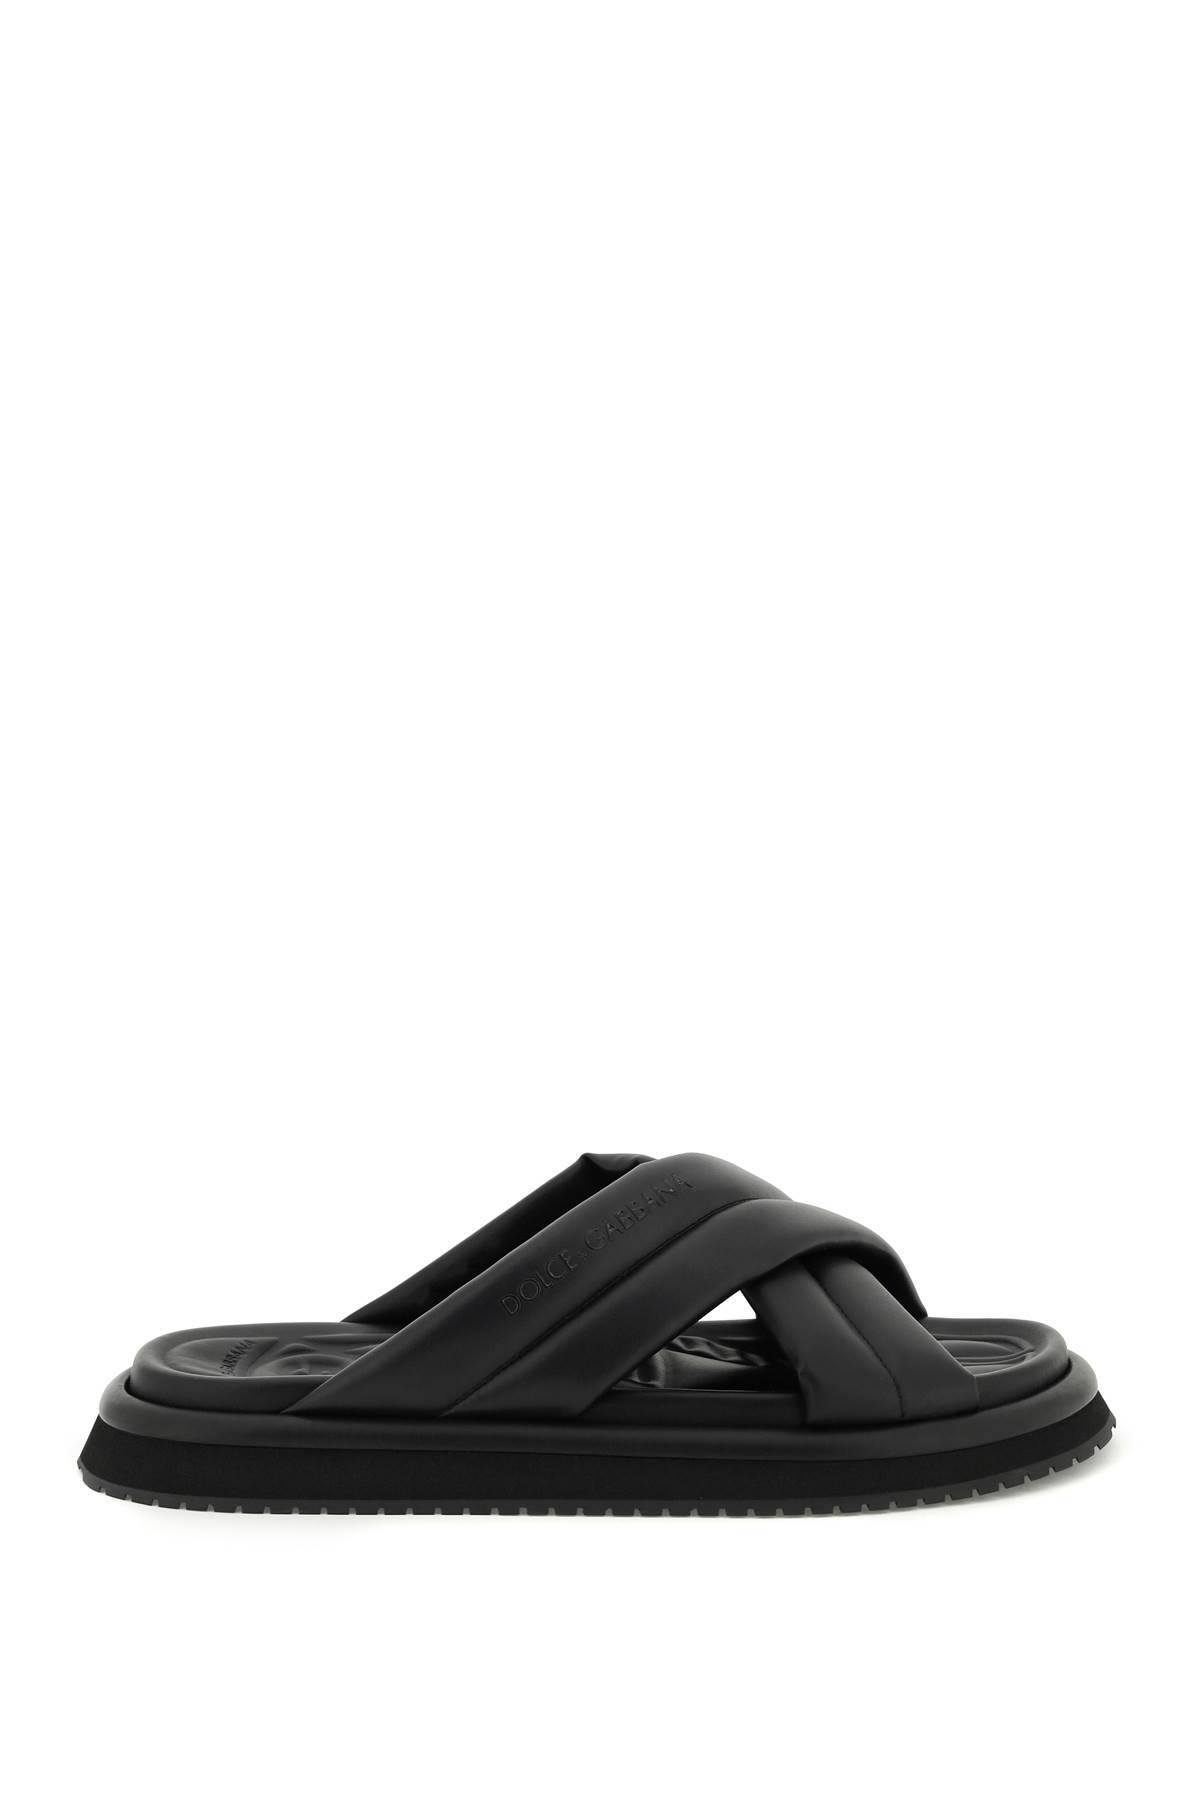 Dolce & Gabbana Faux Leather Slides In Black